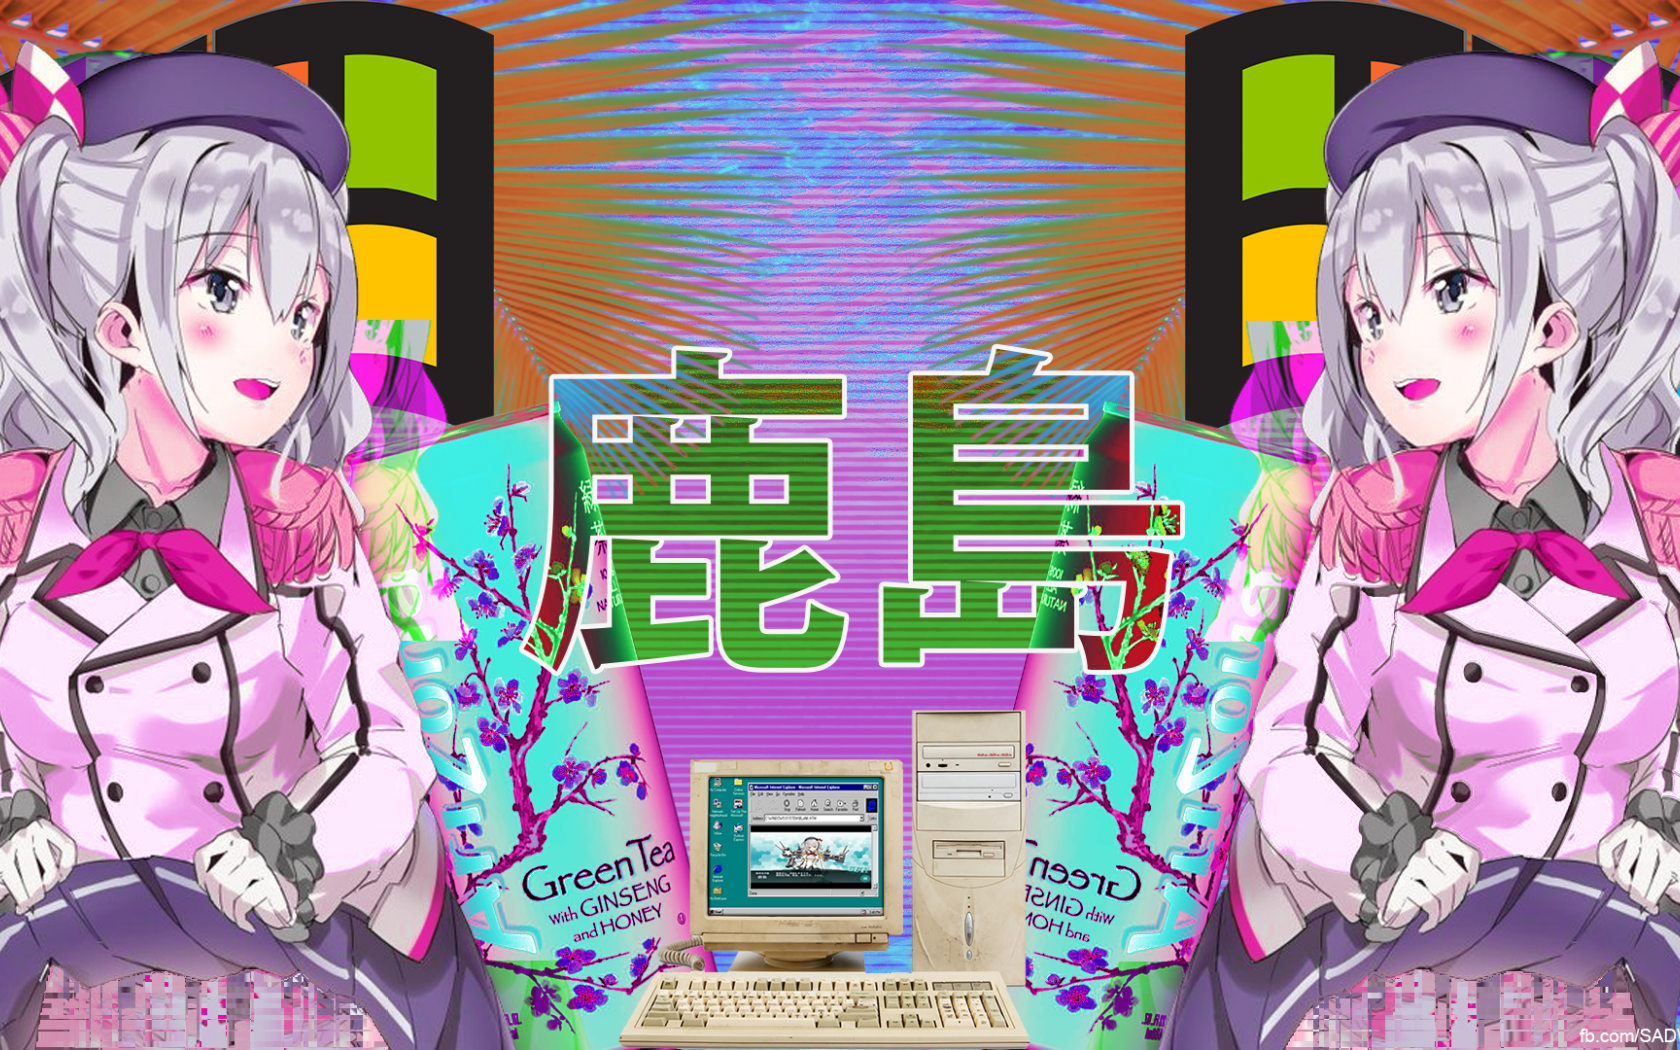 Free download a e s t h e t i c Vaoorwave Wallpapers mostly anime